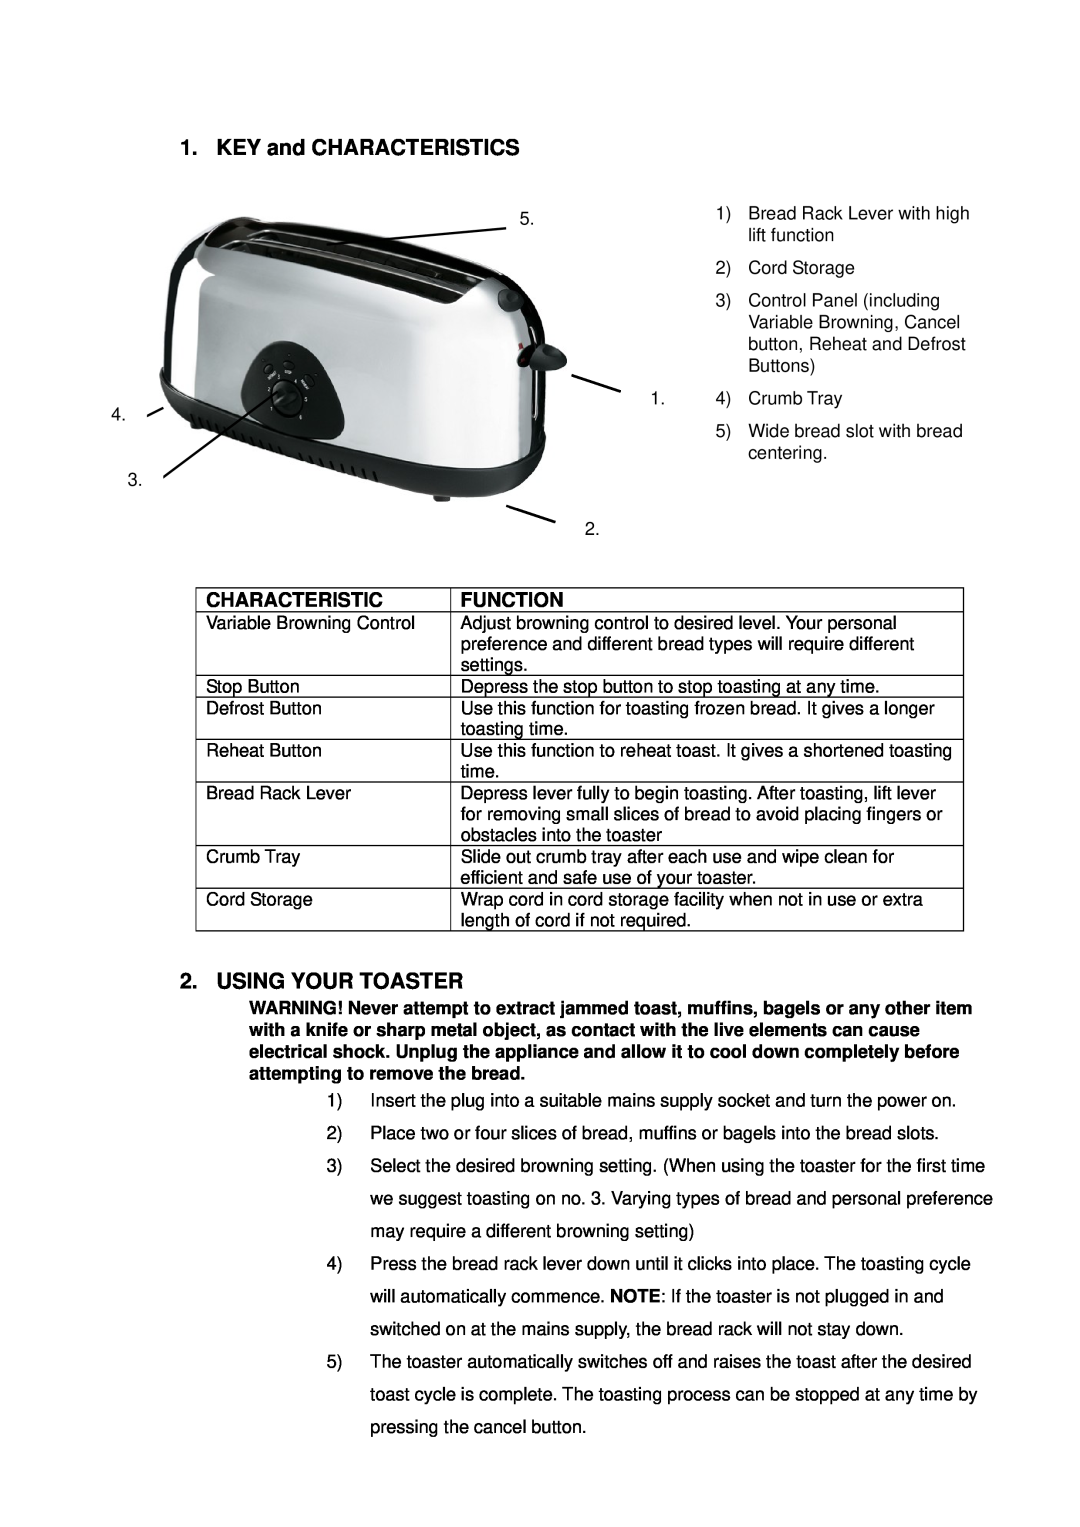 Mellerware 24408 instruction manual KEY and CHARACTERISTICS, Using Your Toaster, Characteristic, Function 